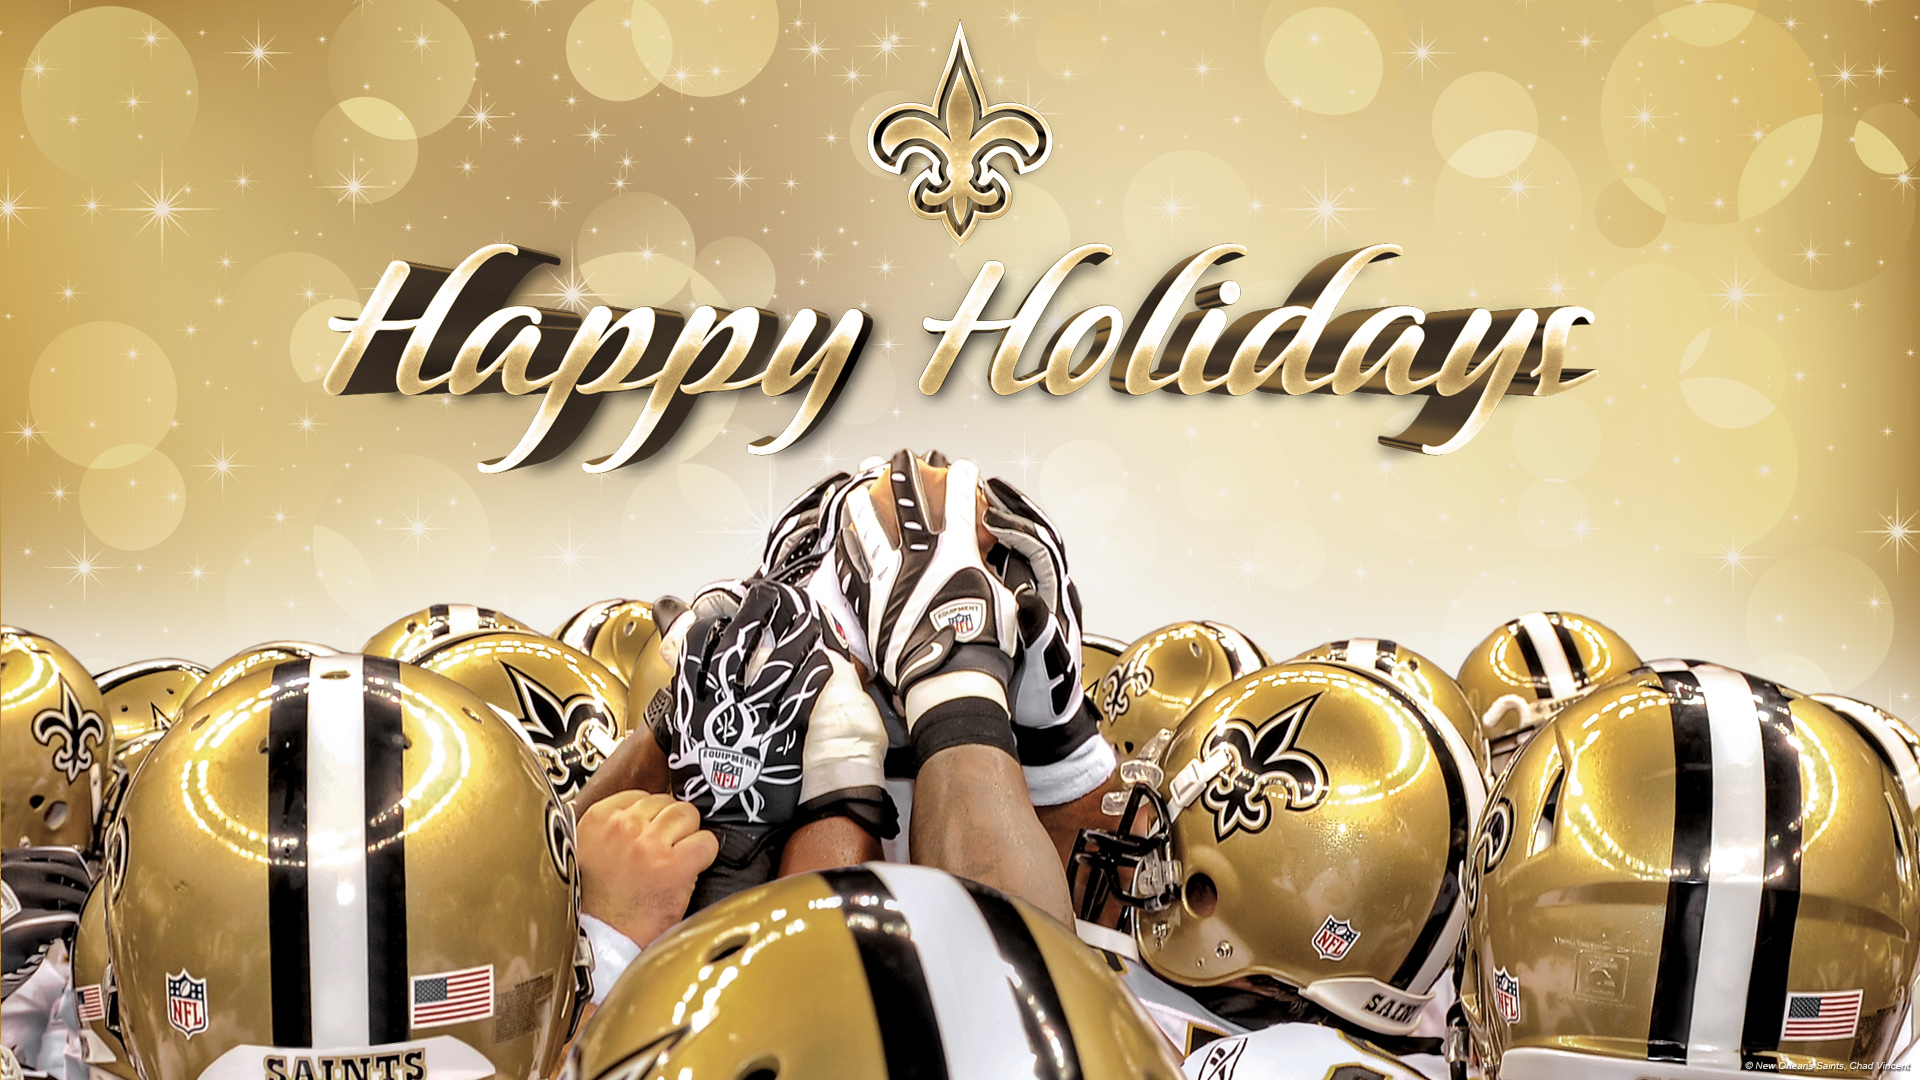 New Orleans Saints Nfl Football Christmas Year Holiday Wallpaper